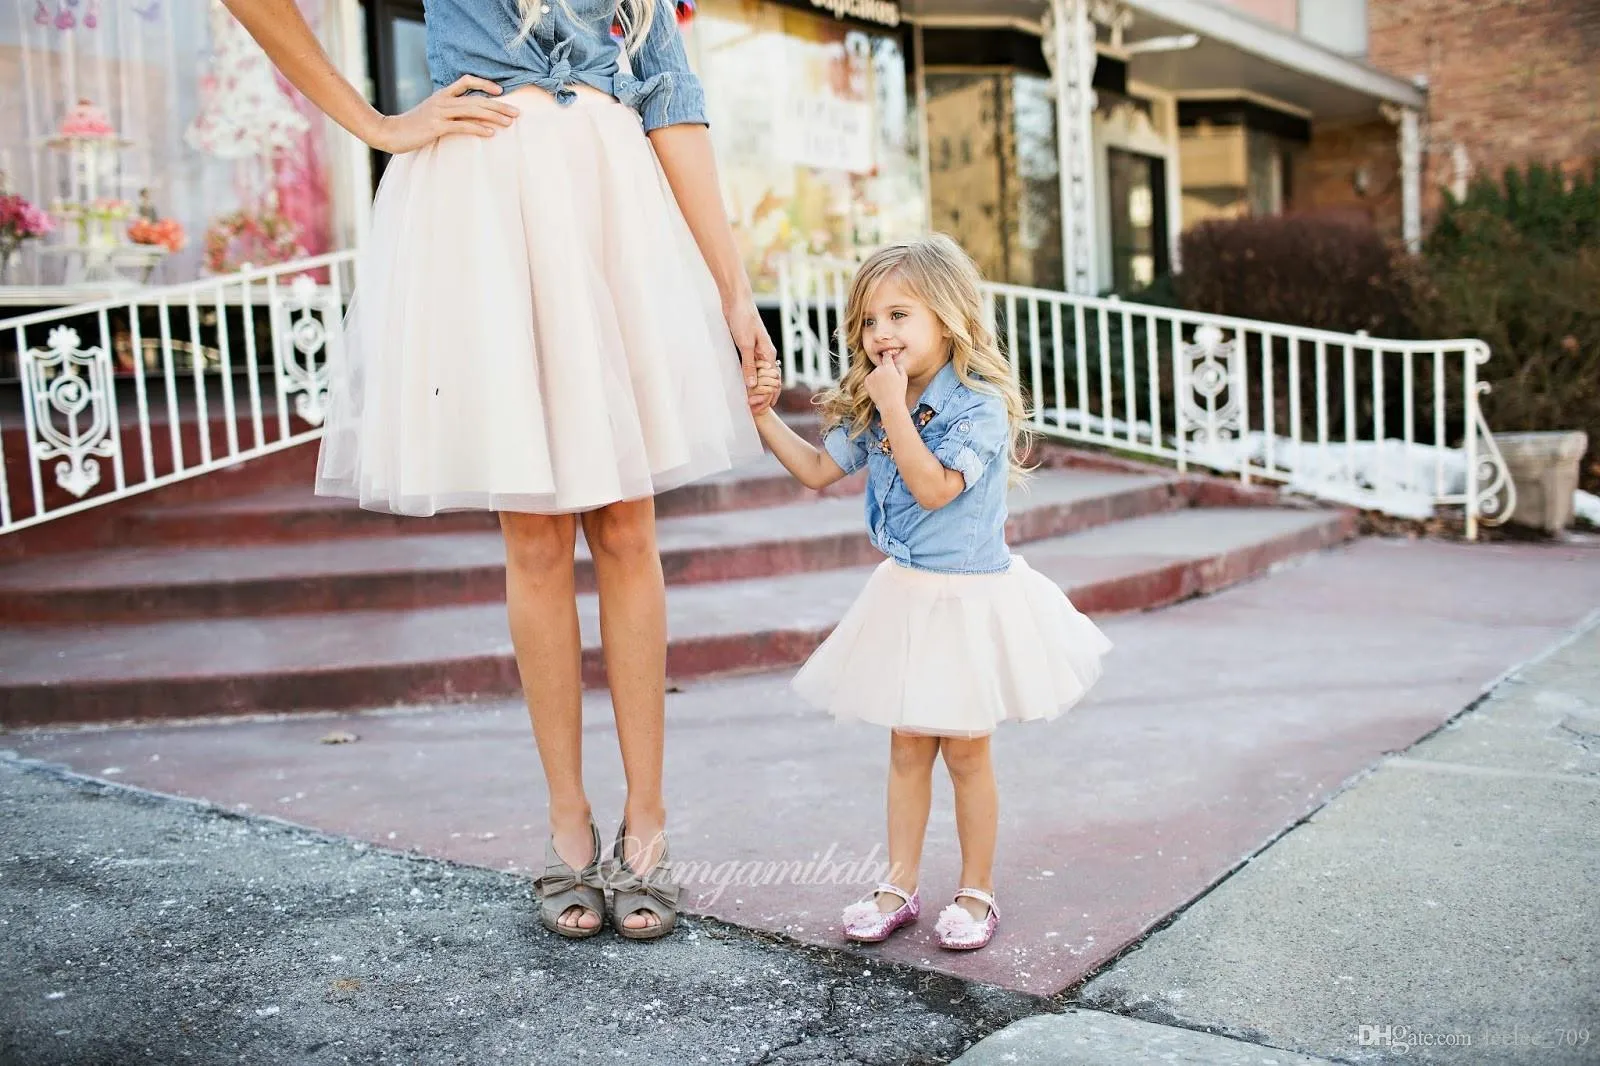 Family Matching Clothes Mommy And Daughter Dress Mom & Me Denim Blouse White Tutu Skirts Sets